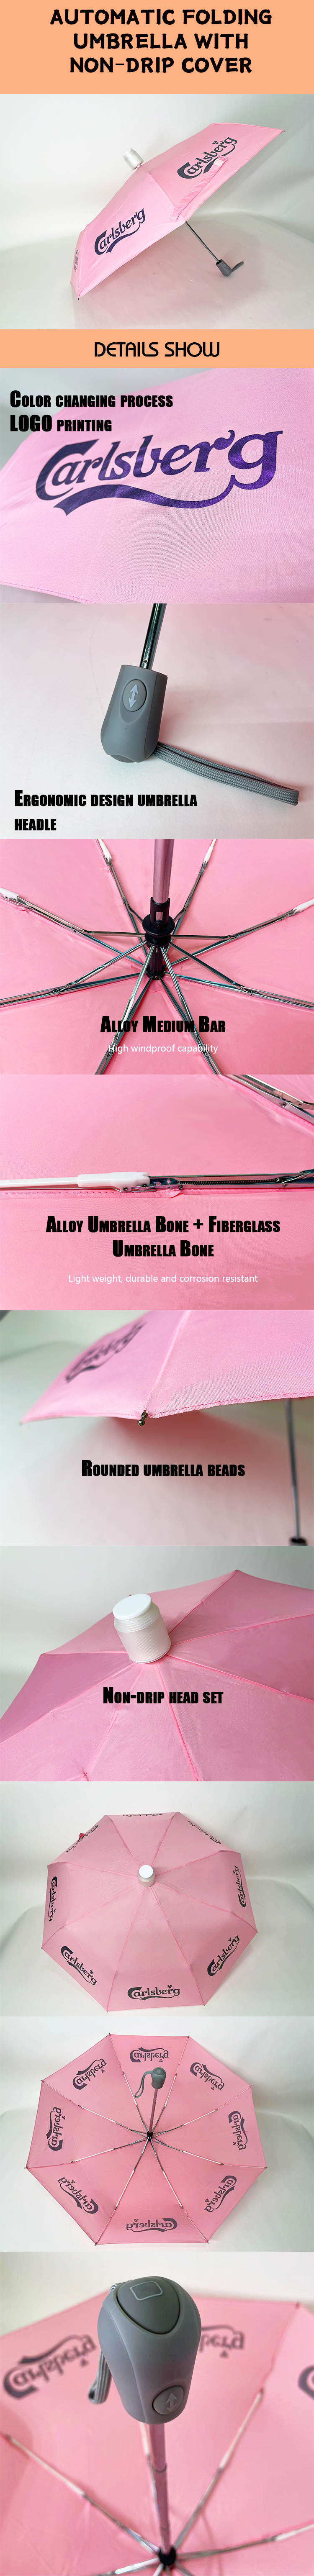 The 6 Best Umbrellas of 2023 | Reviews by Wirecutter